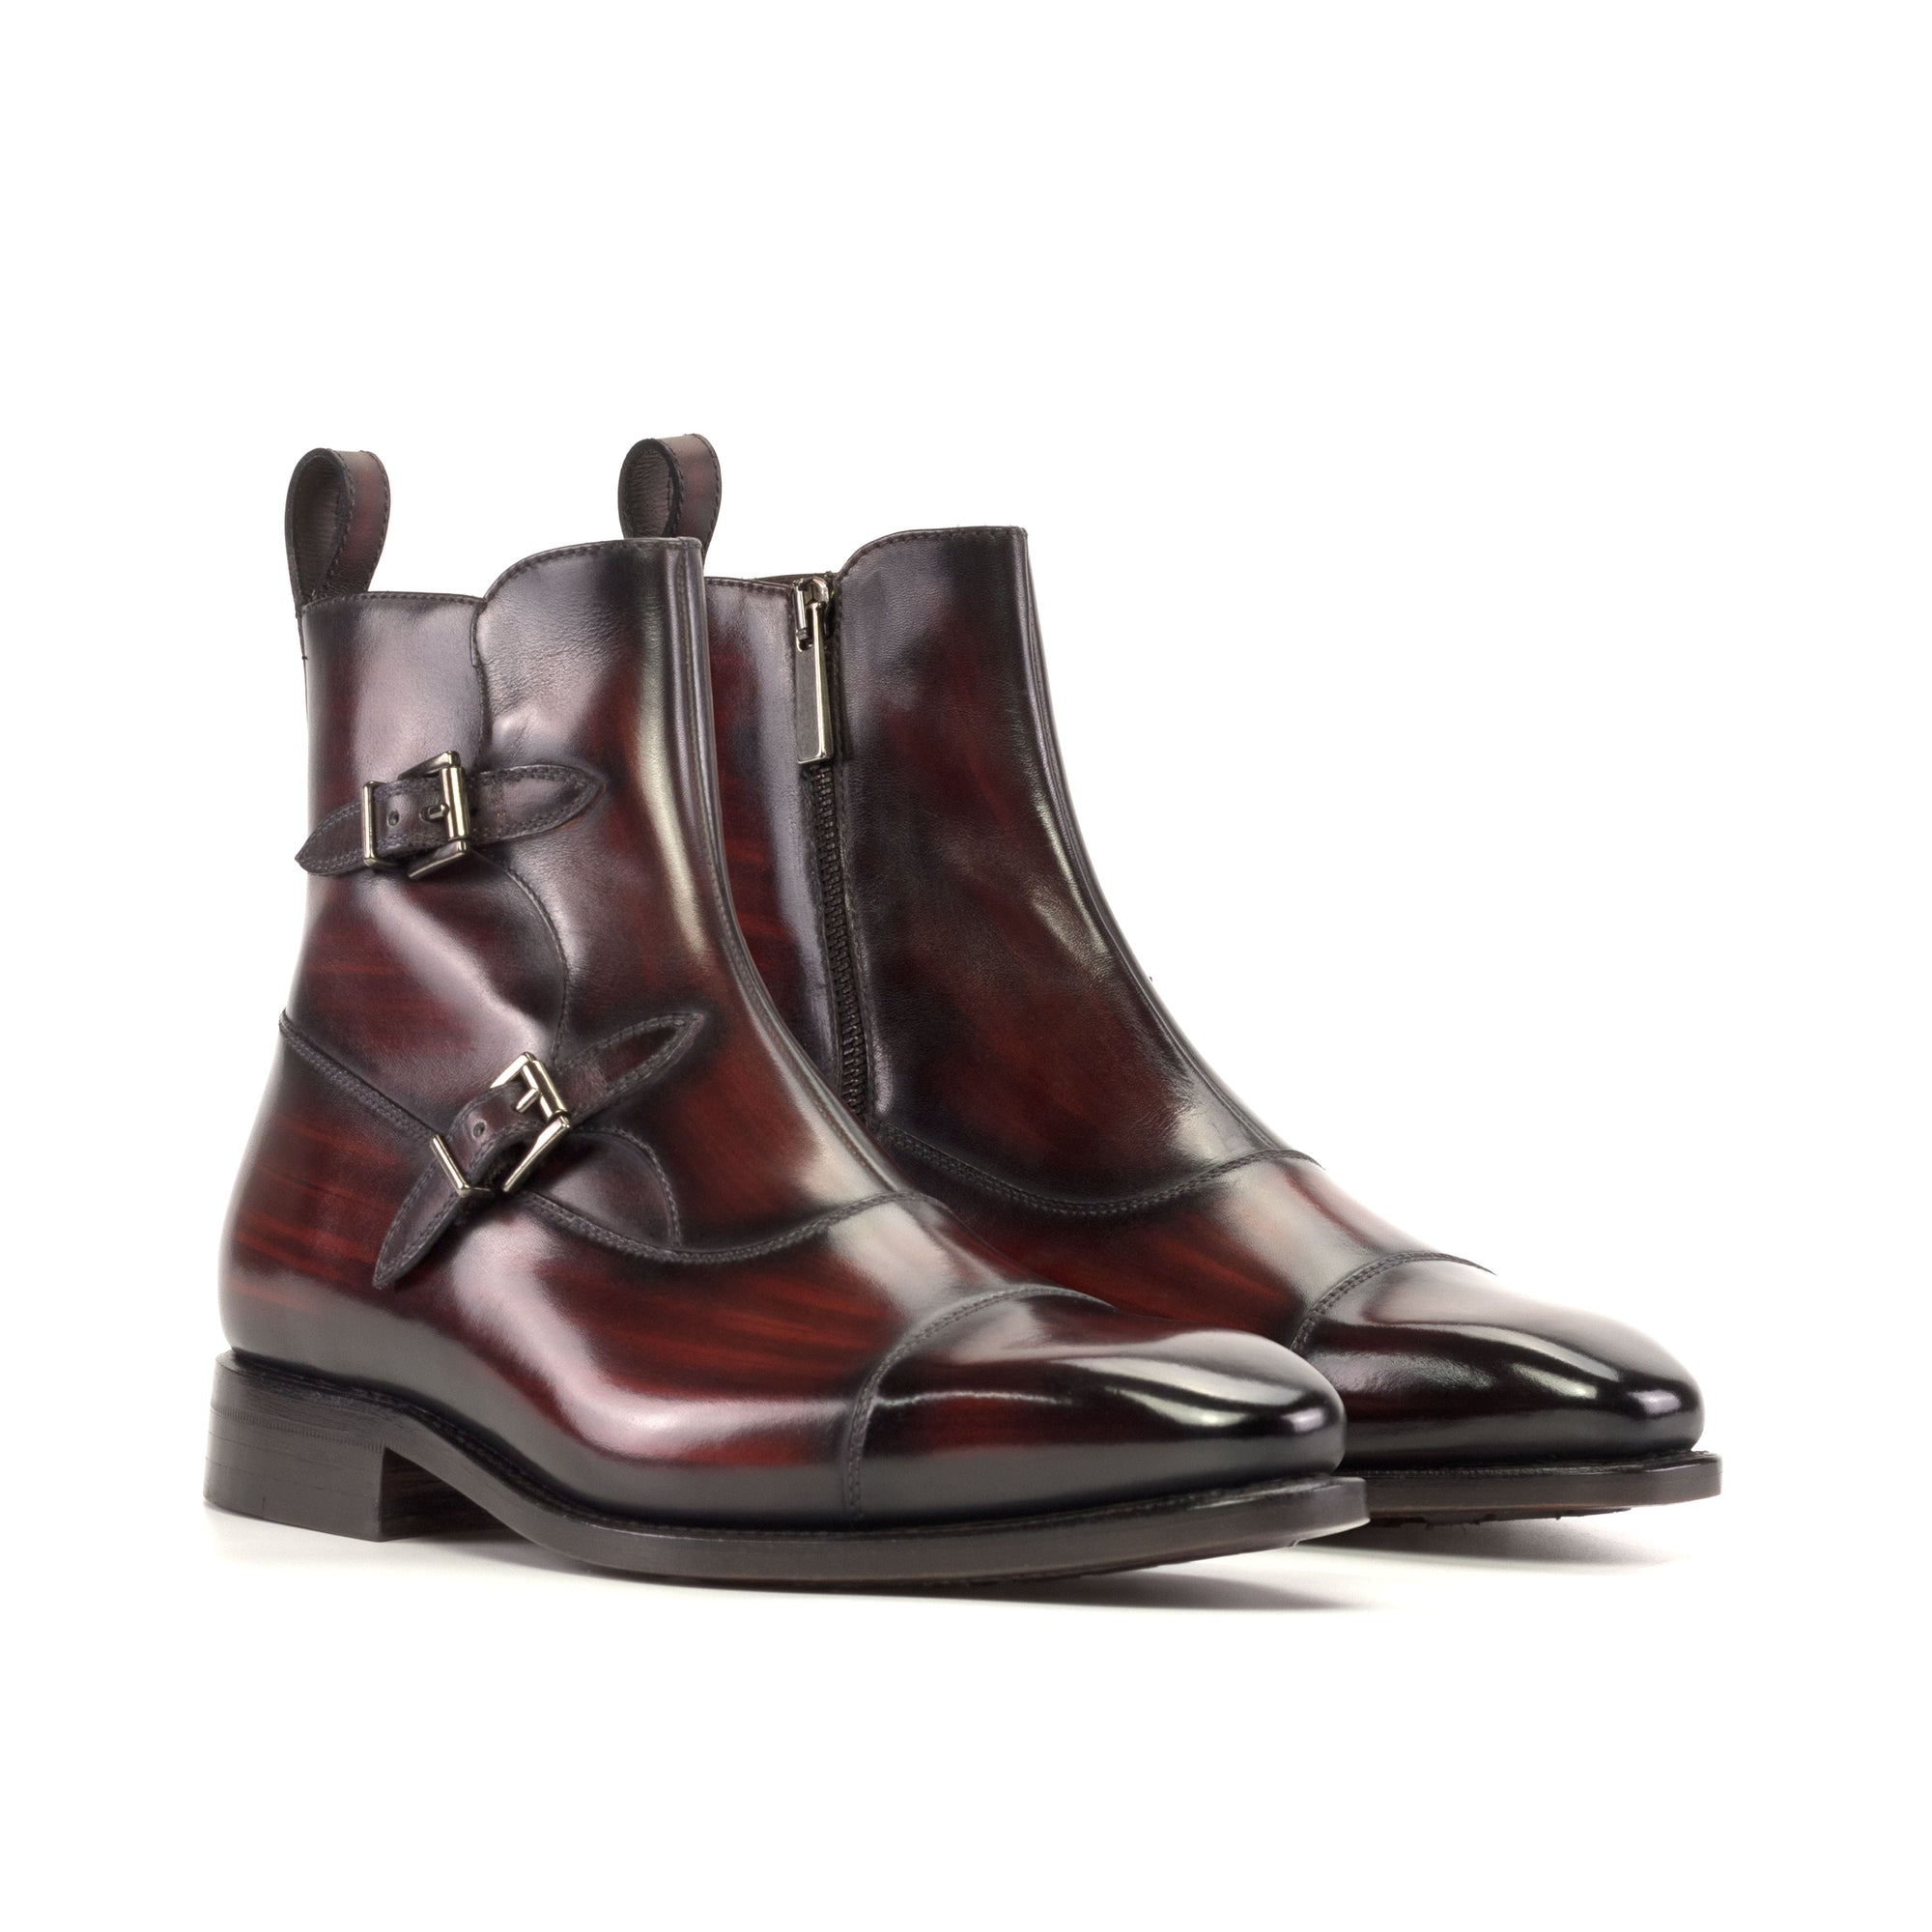 Handmade Goodyear Welted Boots in Burgundy Burnished Leather